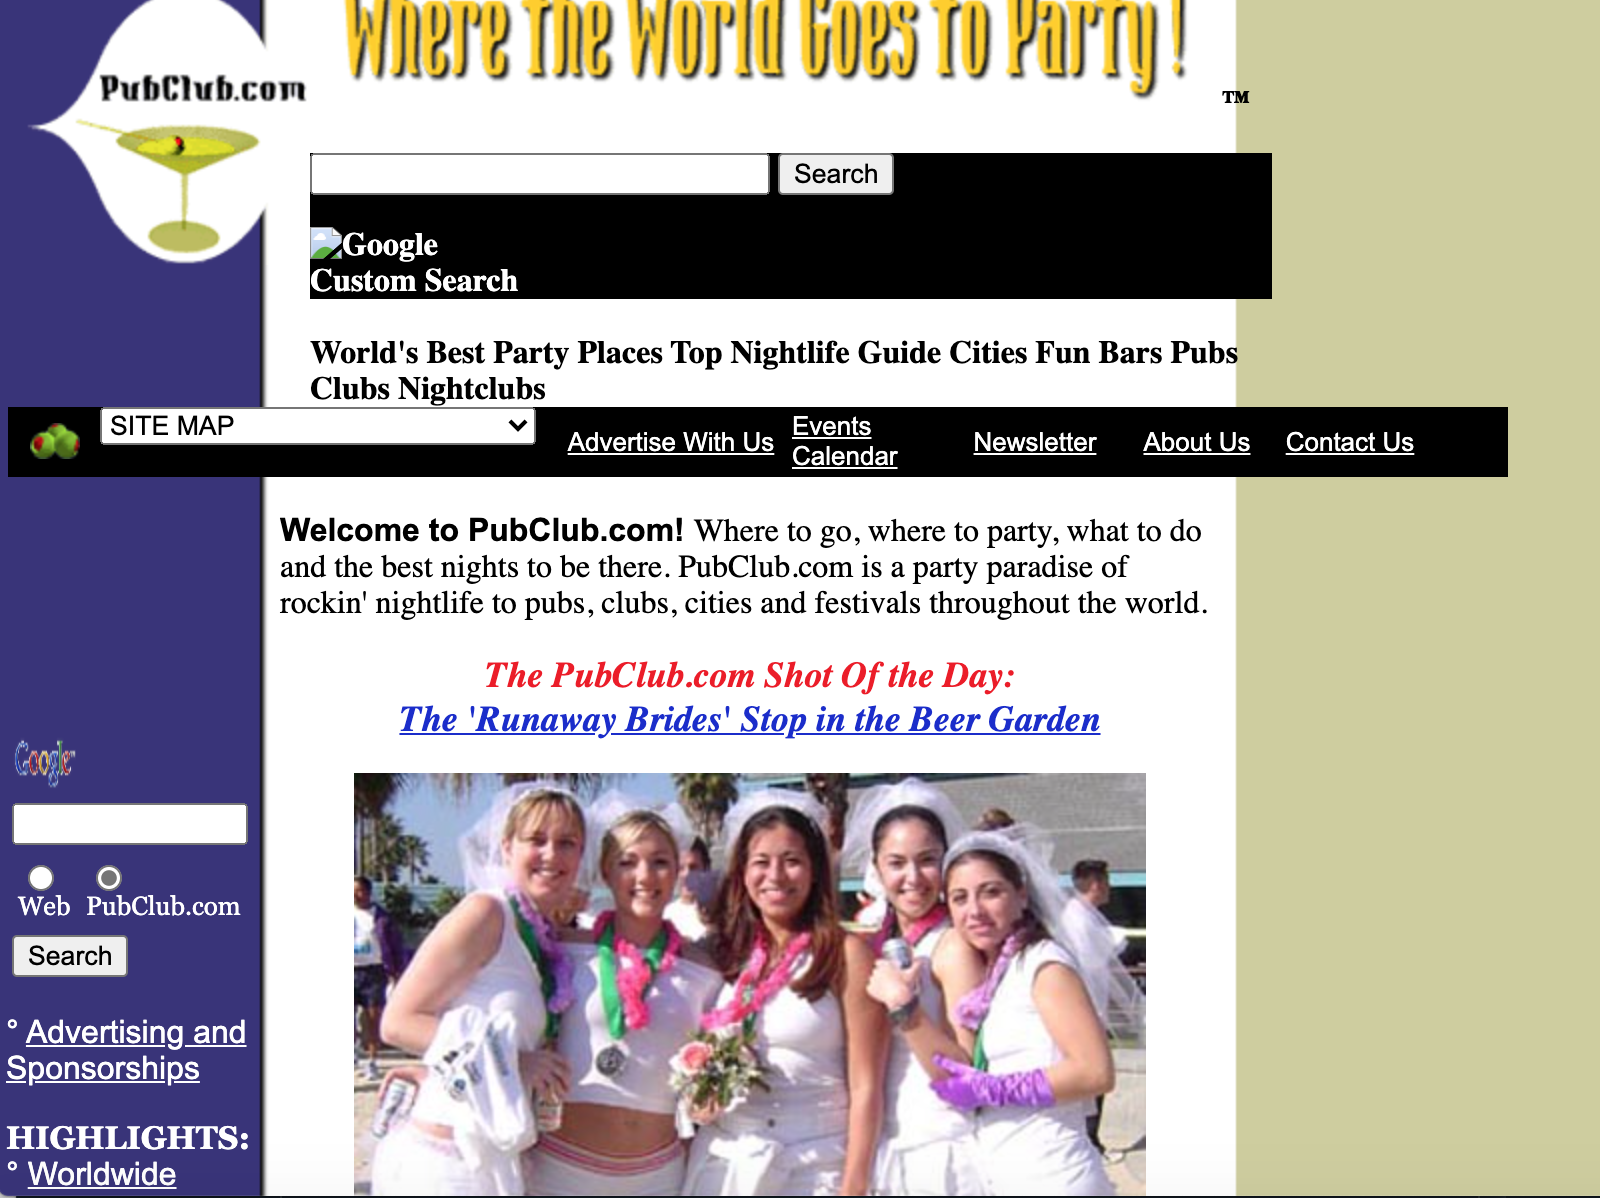 i-missed-out-on-a-party-in-amsterdam-so-i-decided-to-build-a-profitable-tourist-guide-website